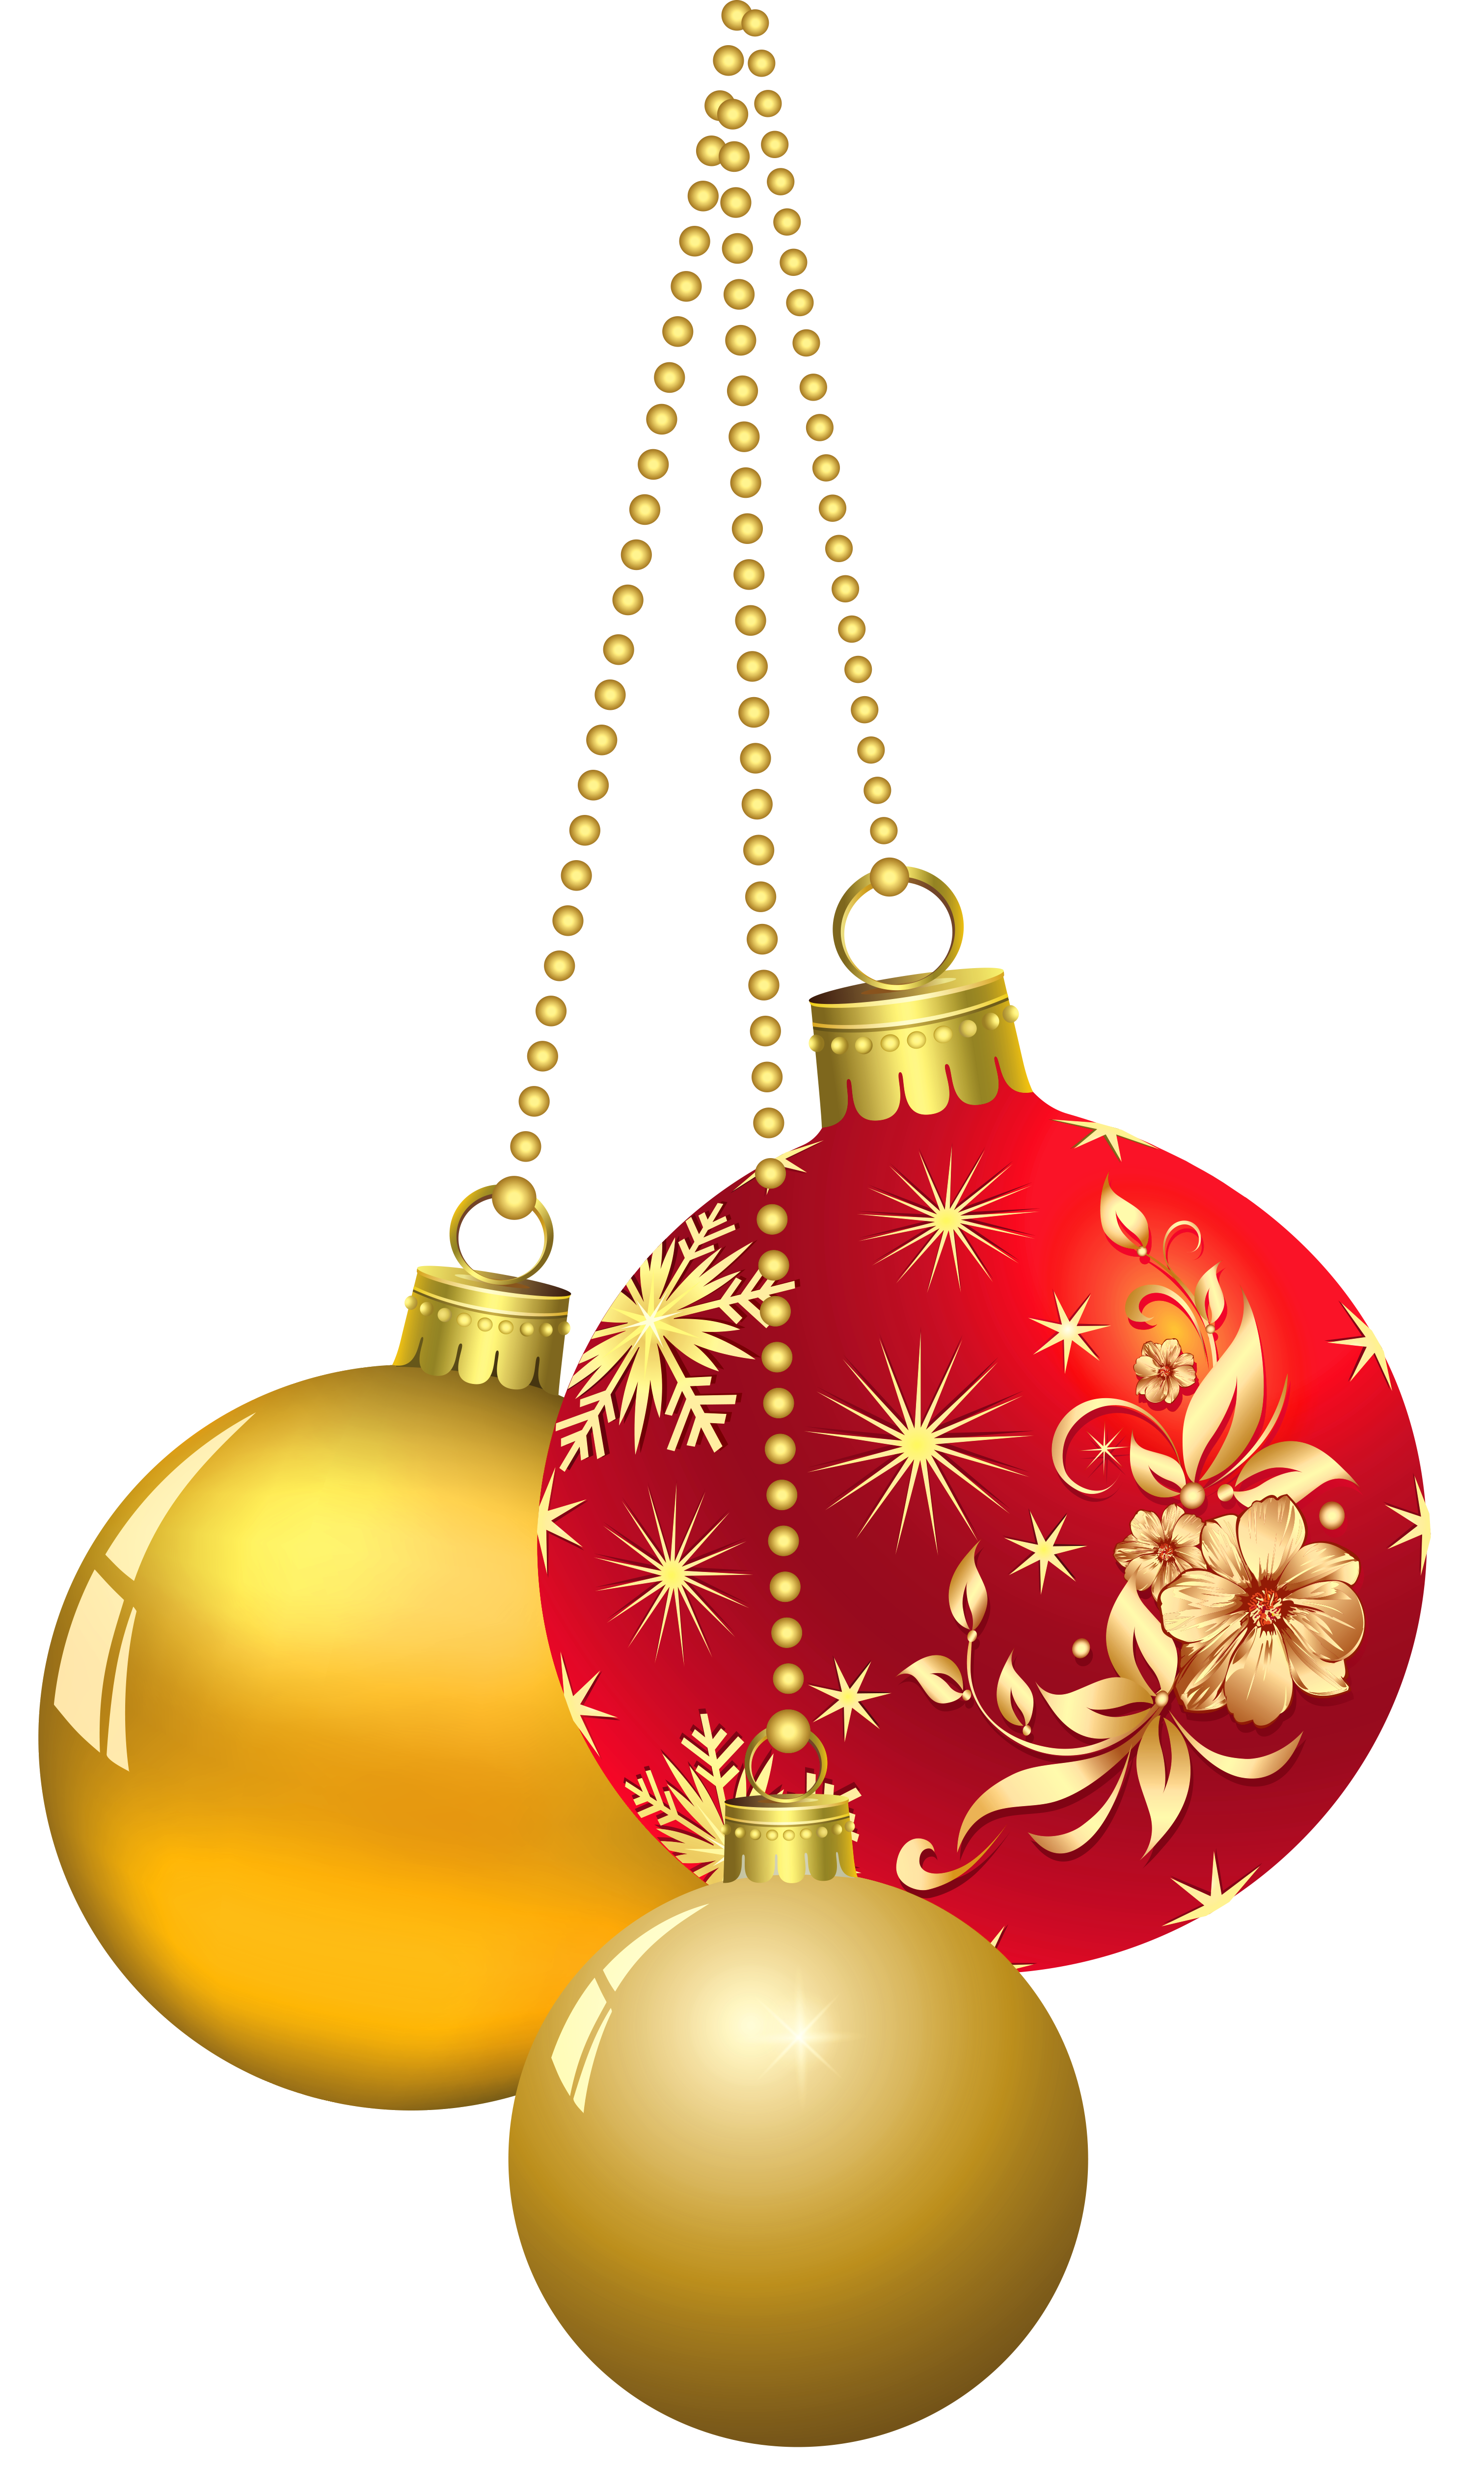 Tree Ornament Christmas Ornaments Transparent Free Download PNG HD Clipart